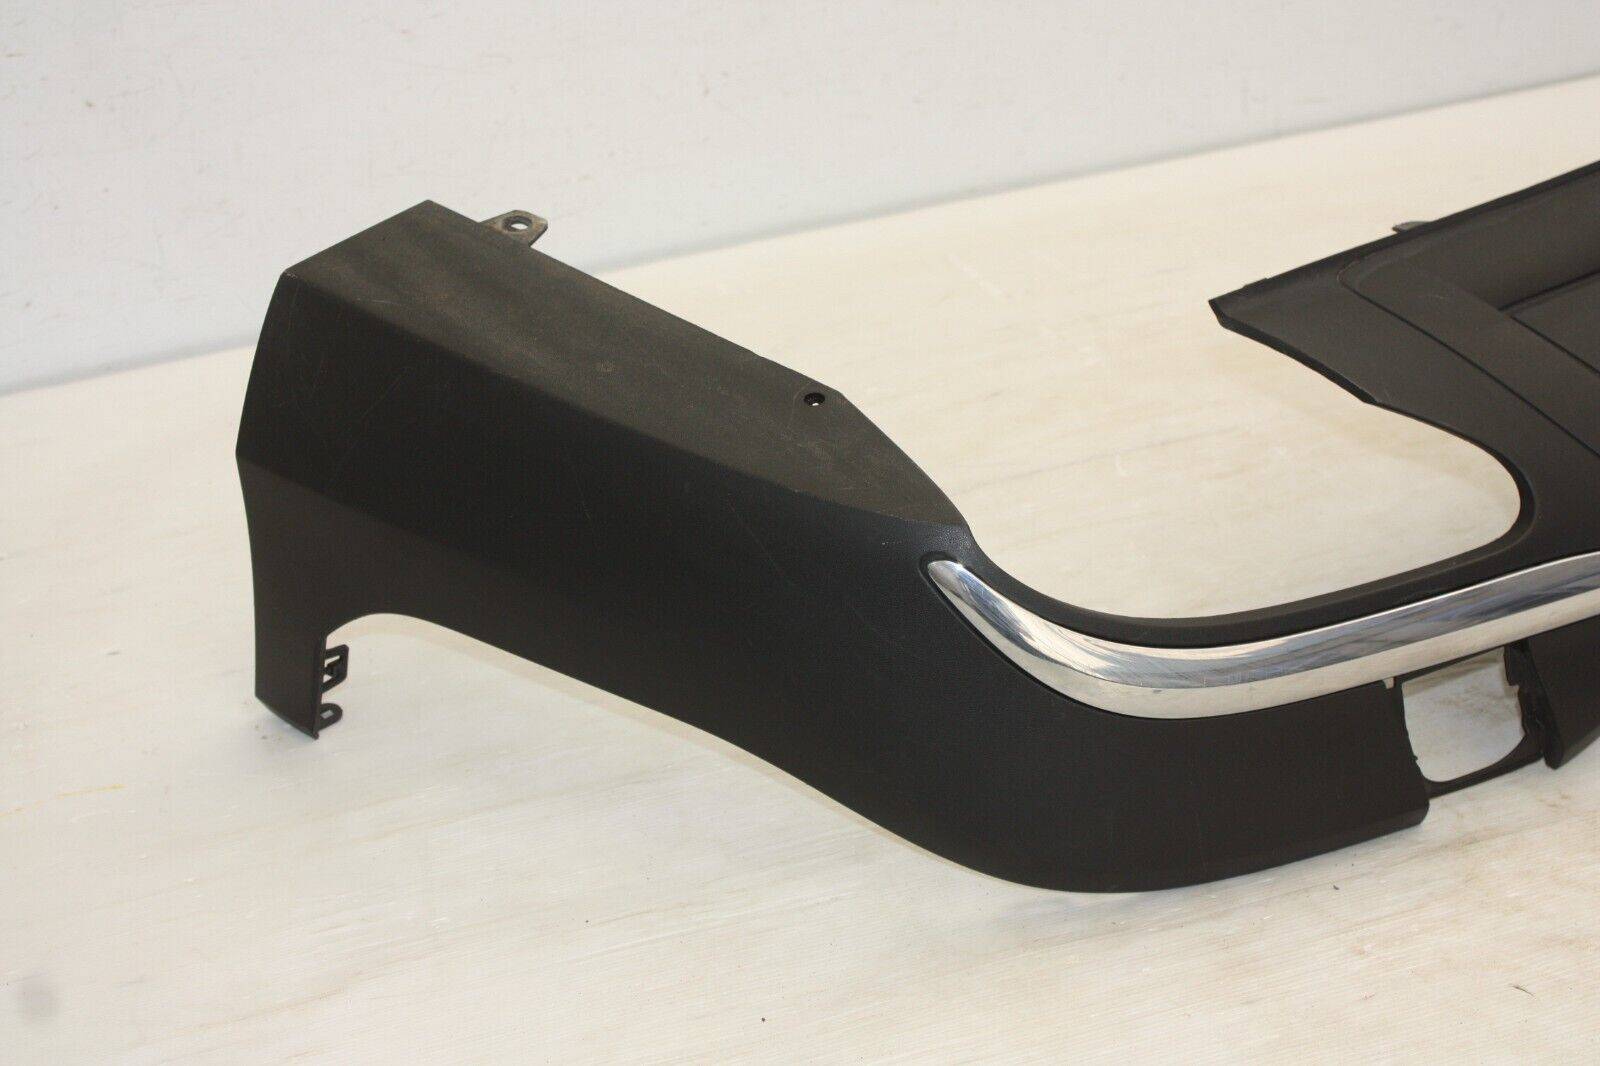 Mercedes-GLC-X253-AMG-Rear-Lower-Section-2015-TO-2019-A2538850300-DAMADED-175636163232-10